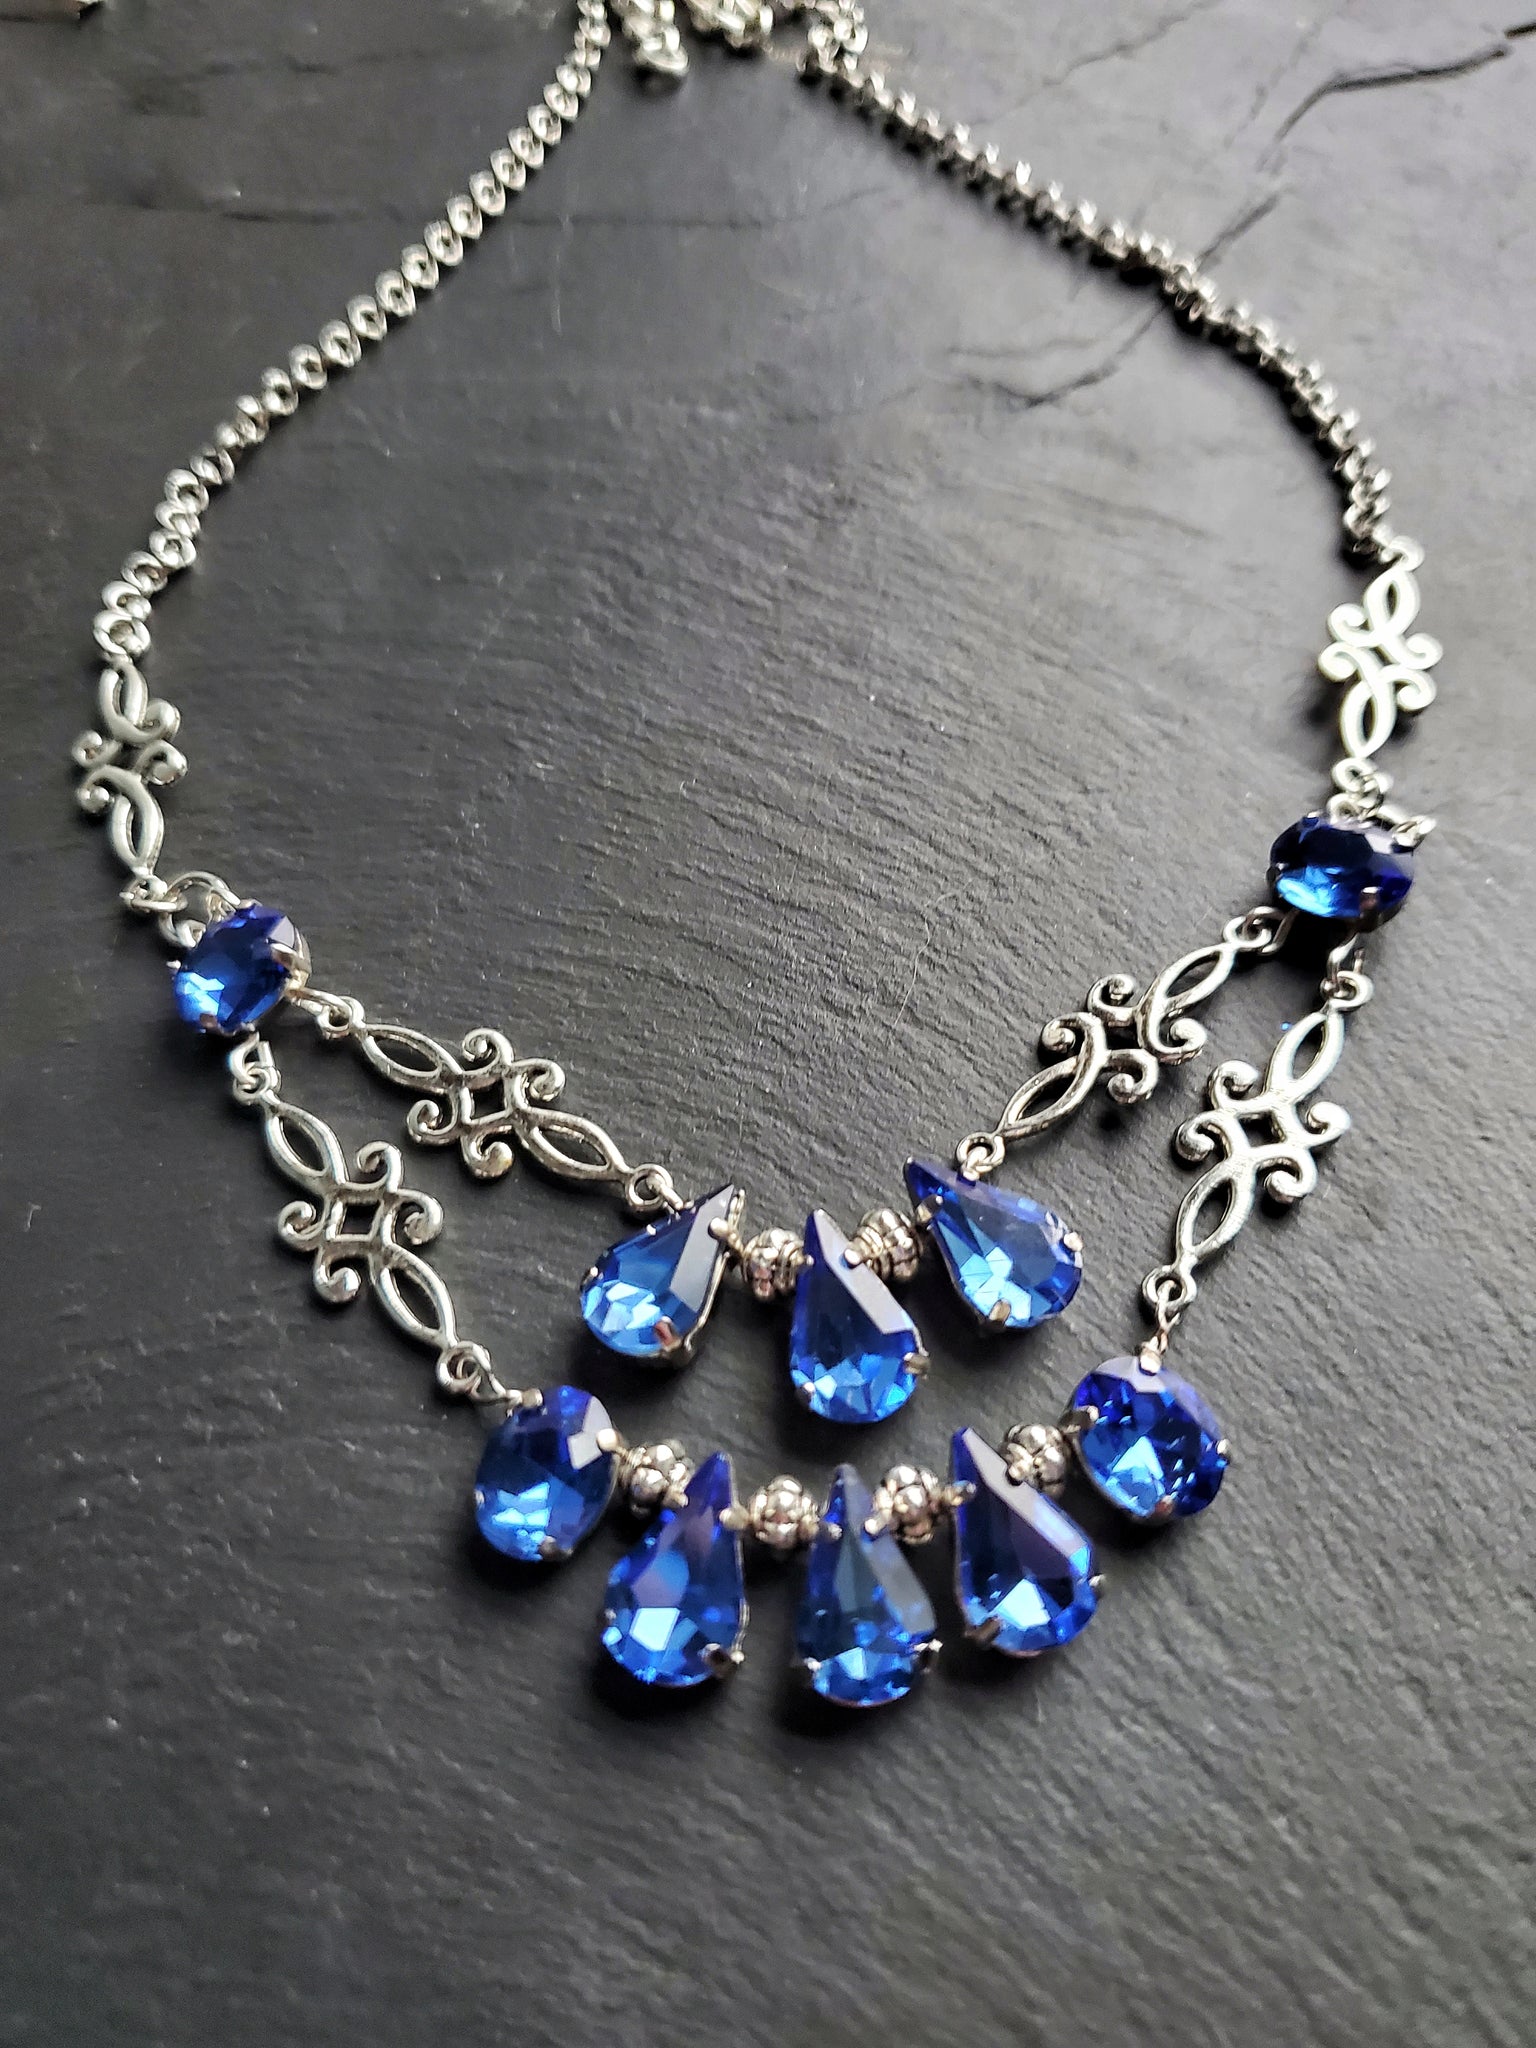 Renaissance Rhinestone Necklace in Red or Blue